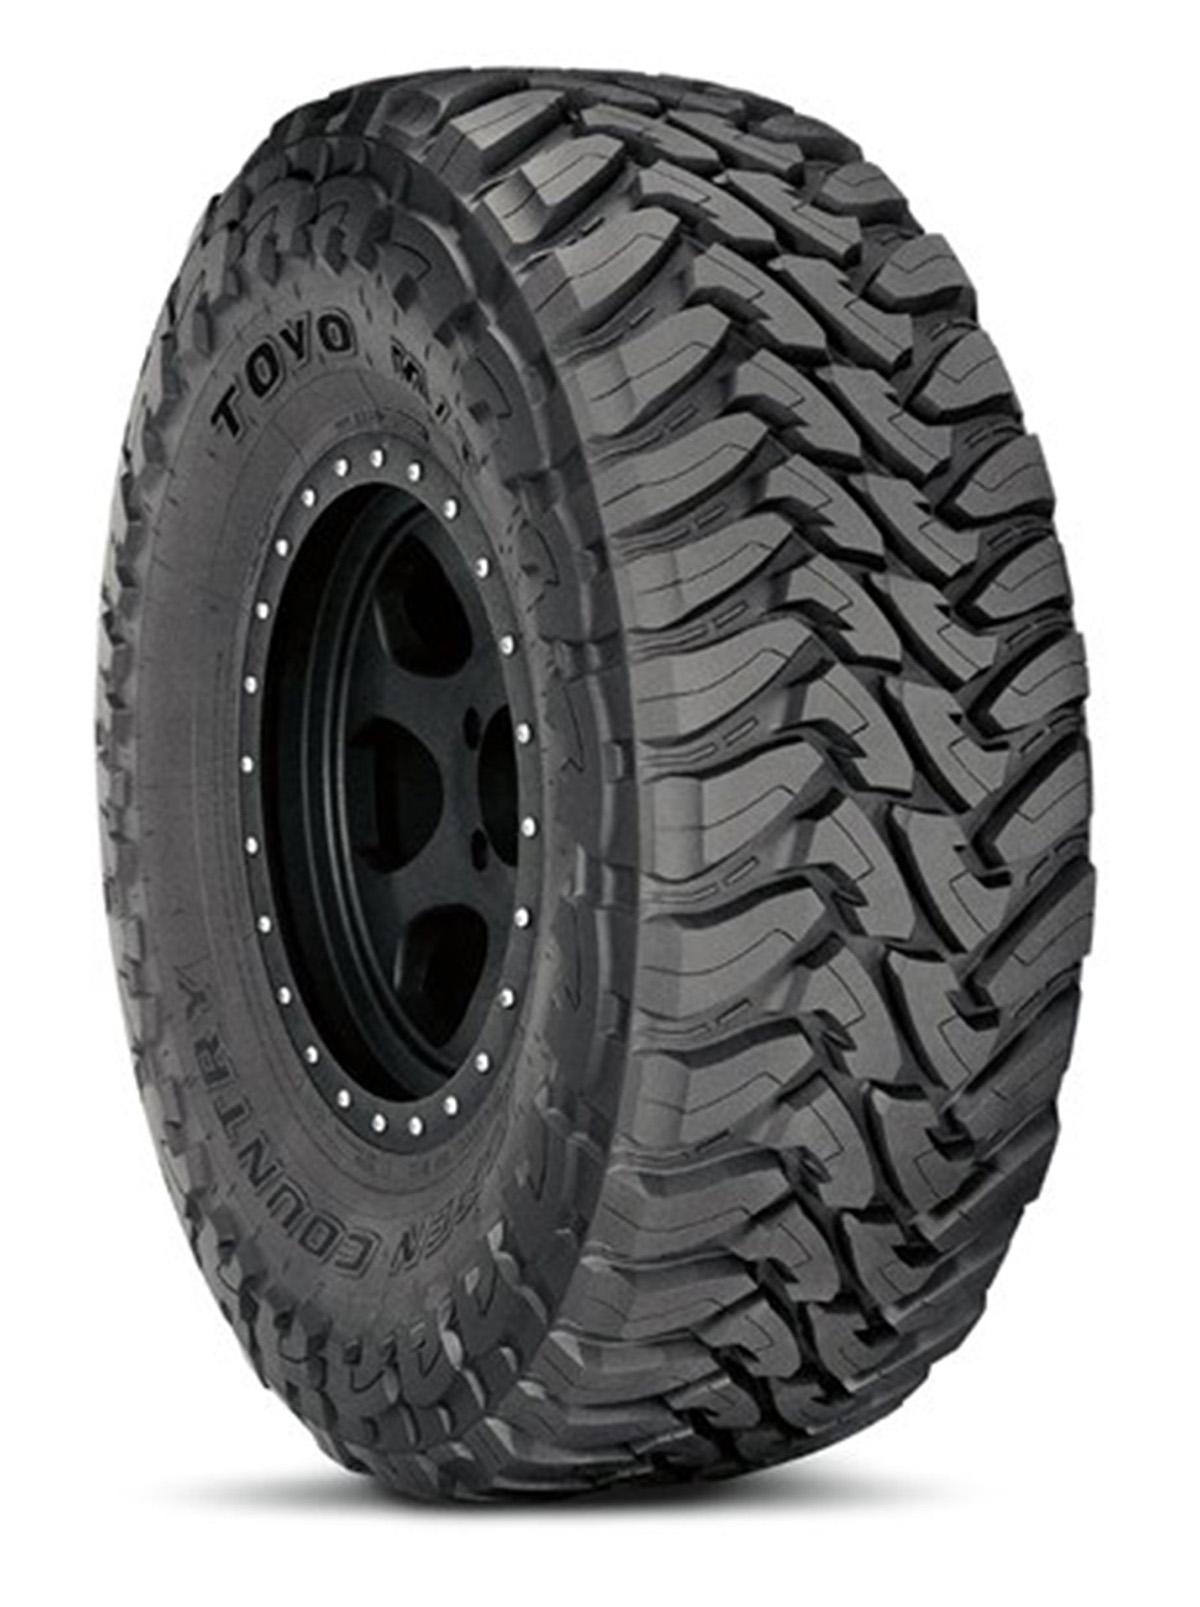 Toyo - OPEN COUNTRY MT  NW  270/25R20